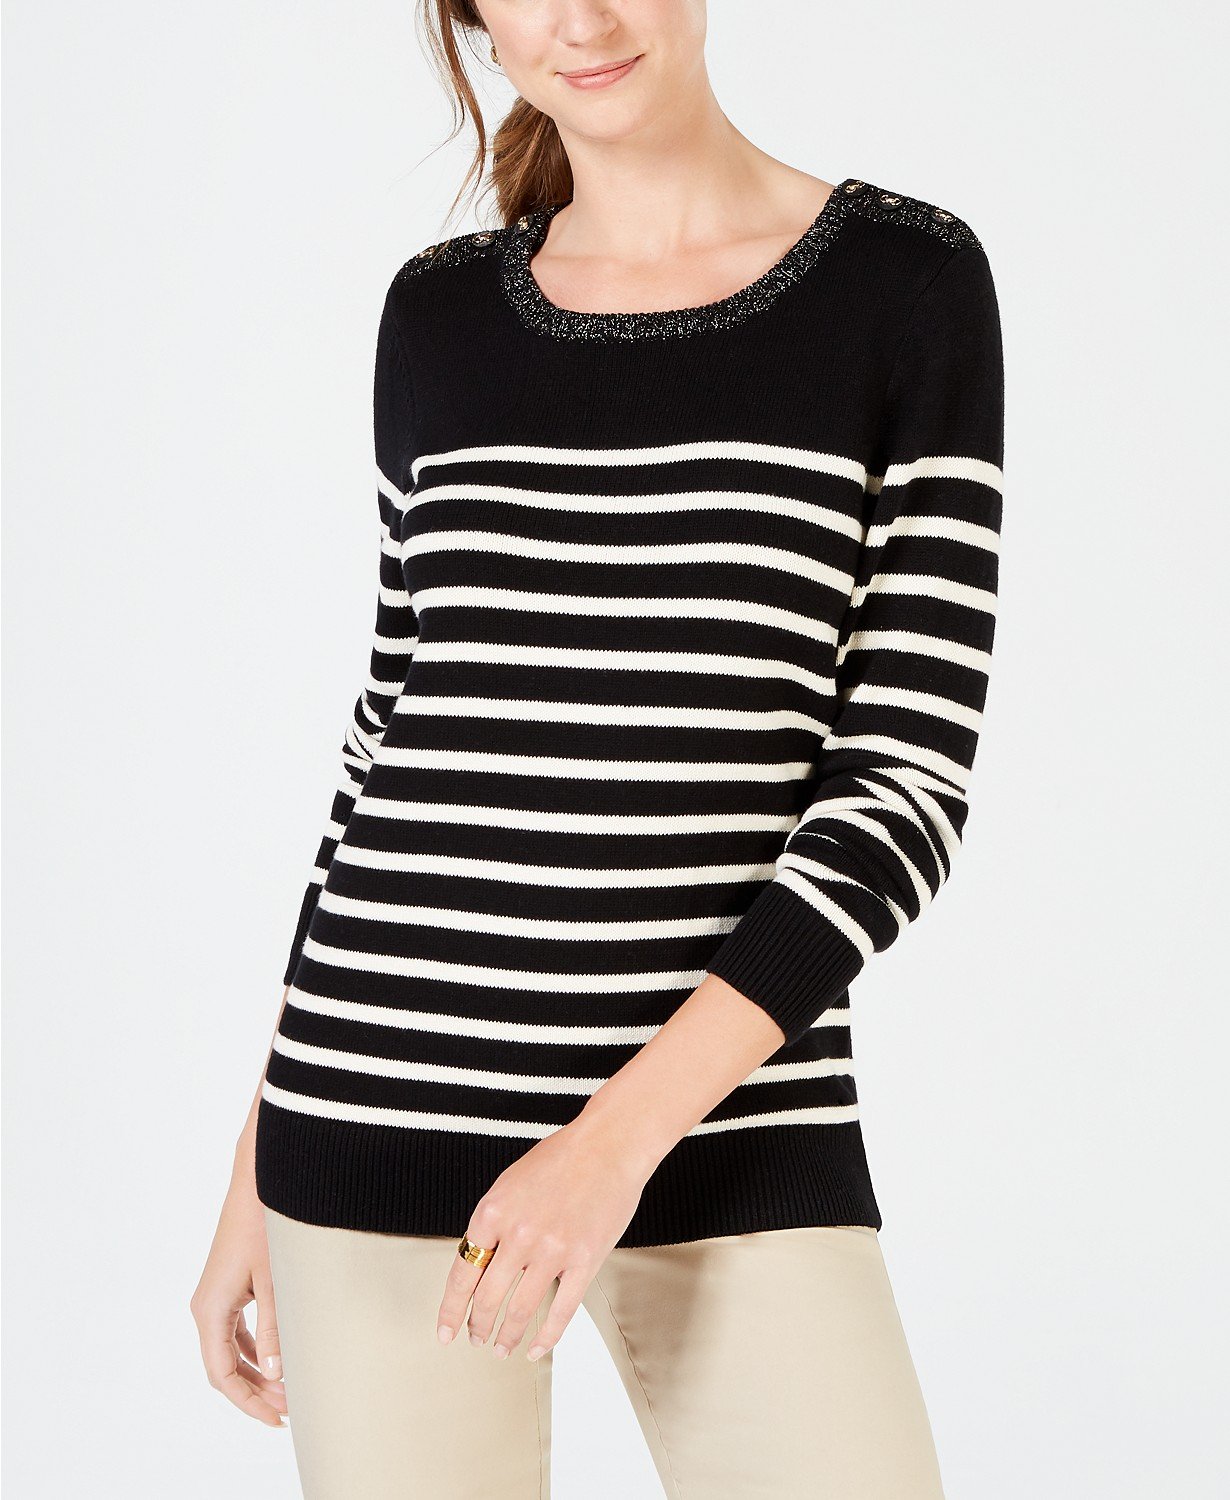 Charter Club Colorblocked Cable-Knit Sweate Black Stripe Combo XL - 